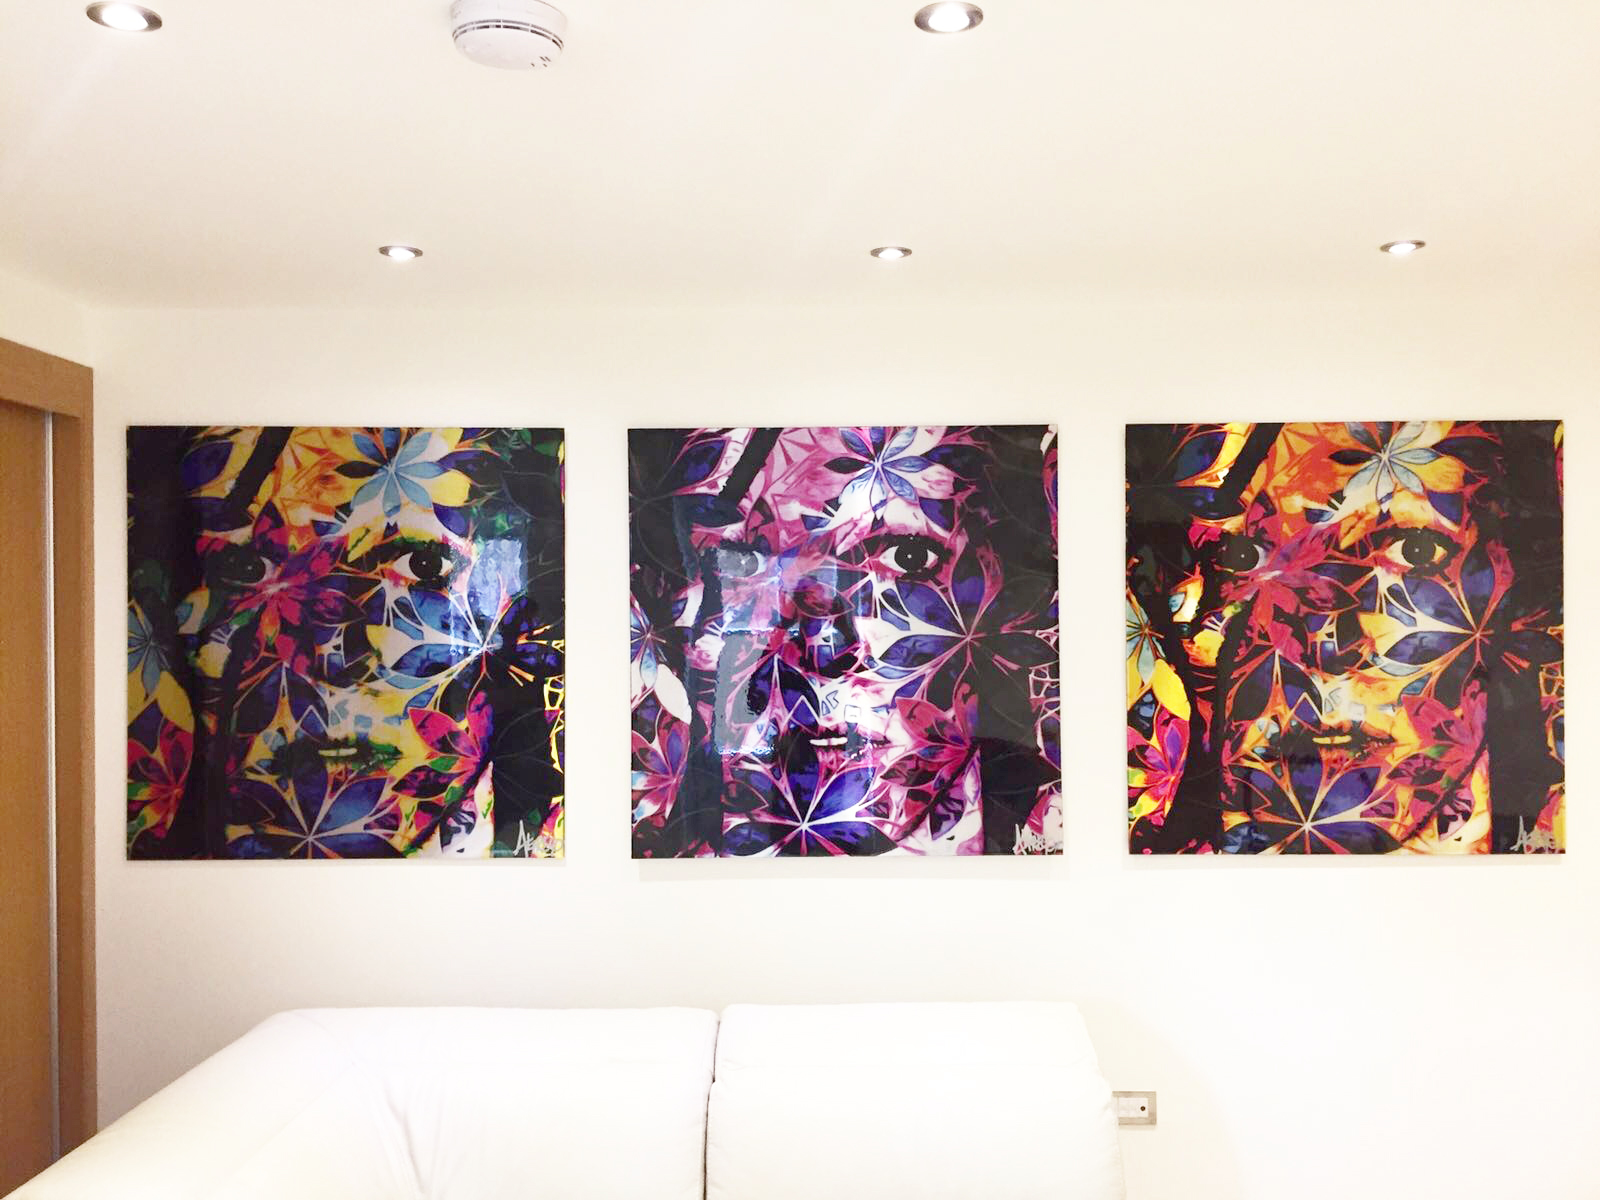 David Bowie Triptych by Iain Alexander | Mixed Media Original on Aluminum in Resin